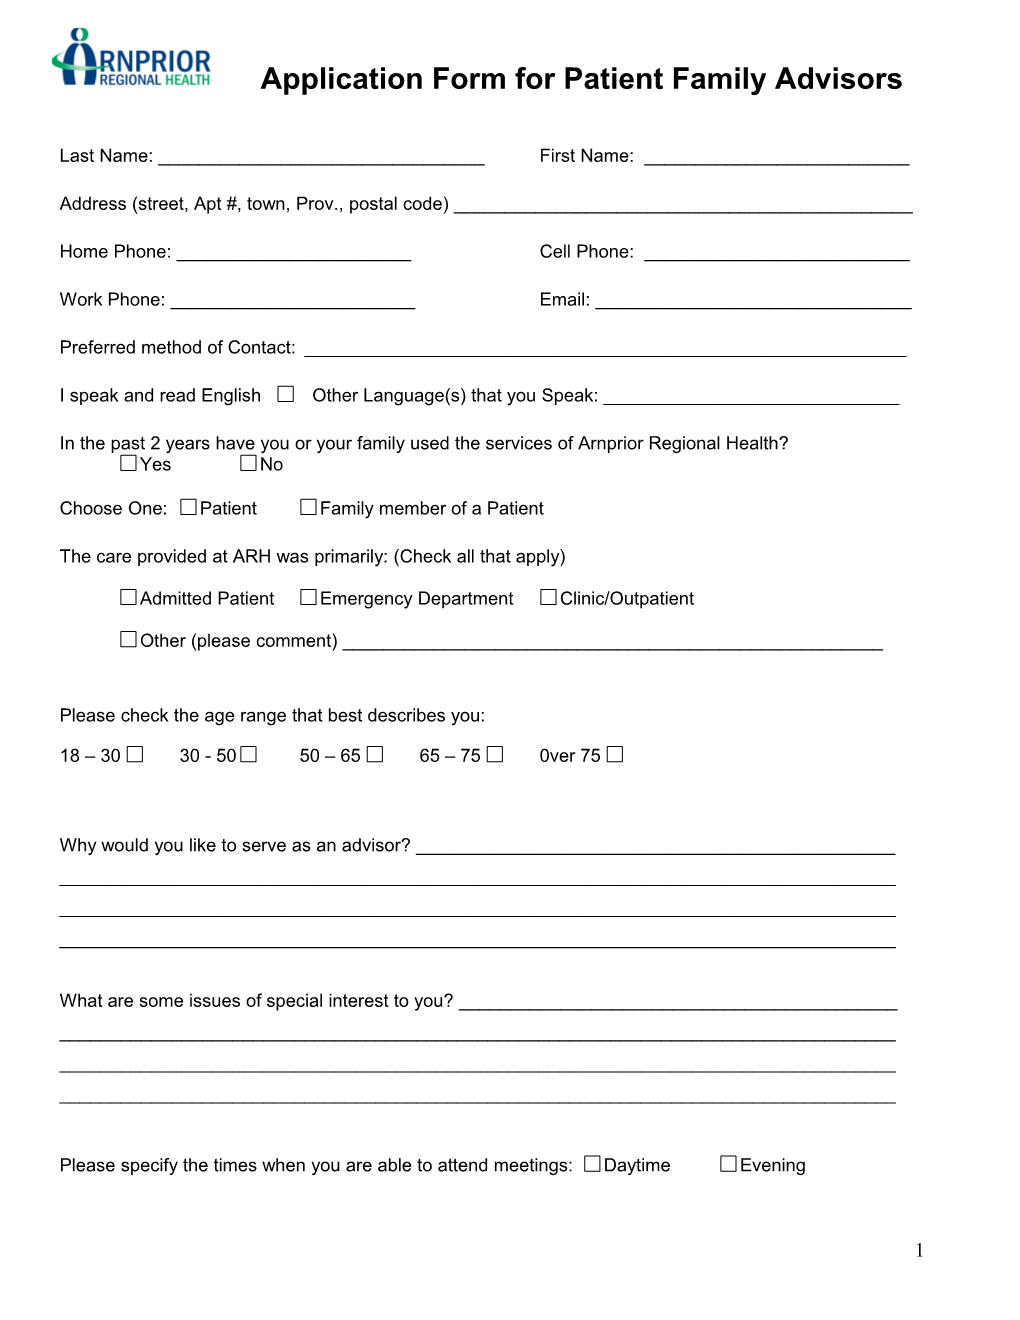 Application Form for Patient Family Advisors